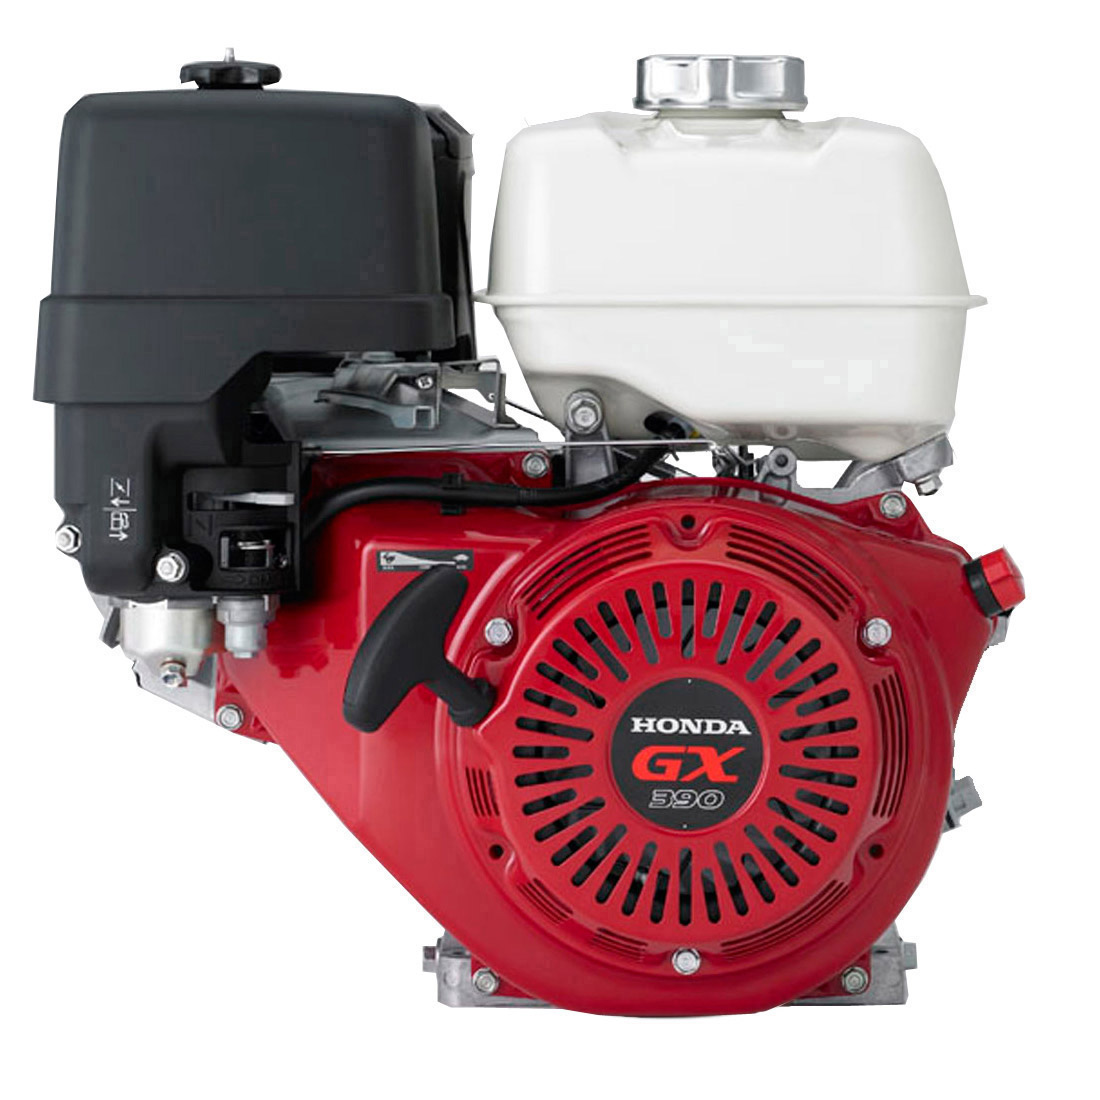 Honda Small Engine Parts for Landscapers in San Antonio, TX